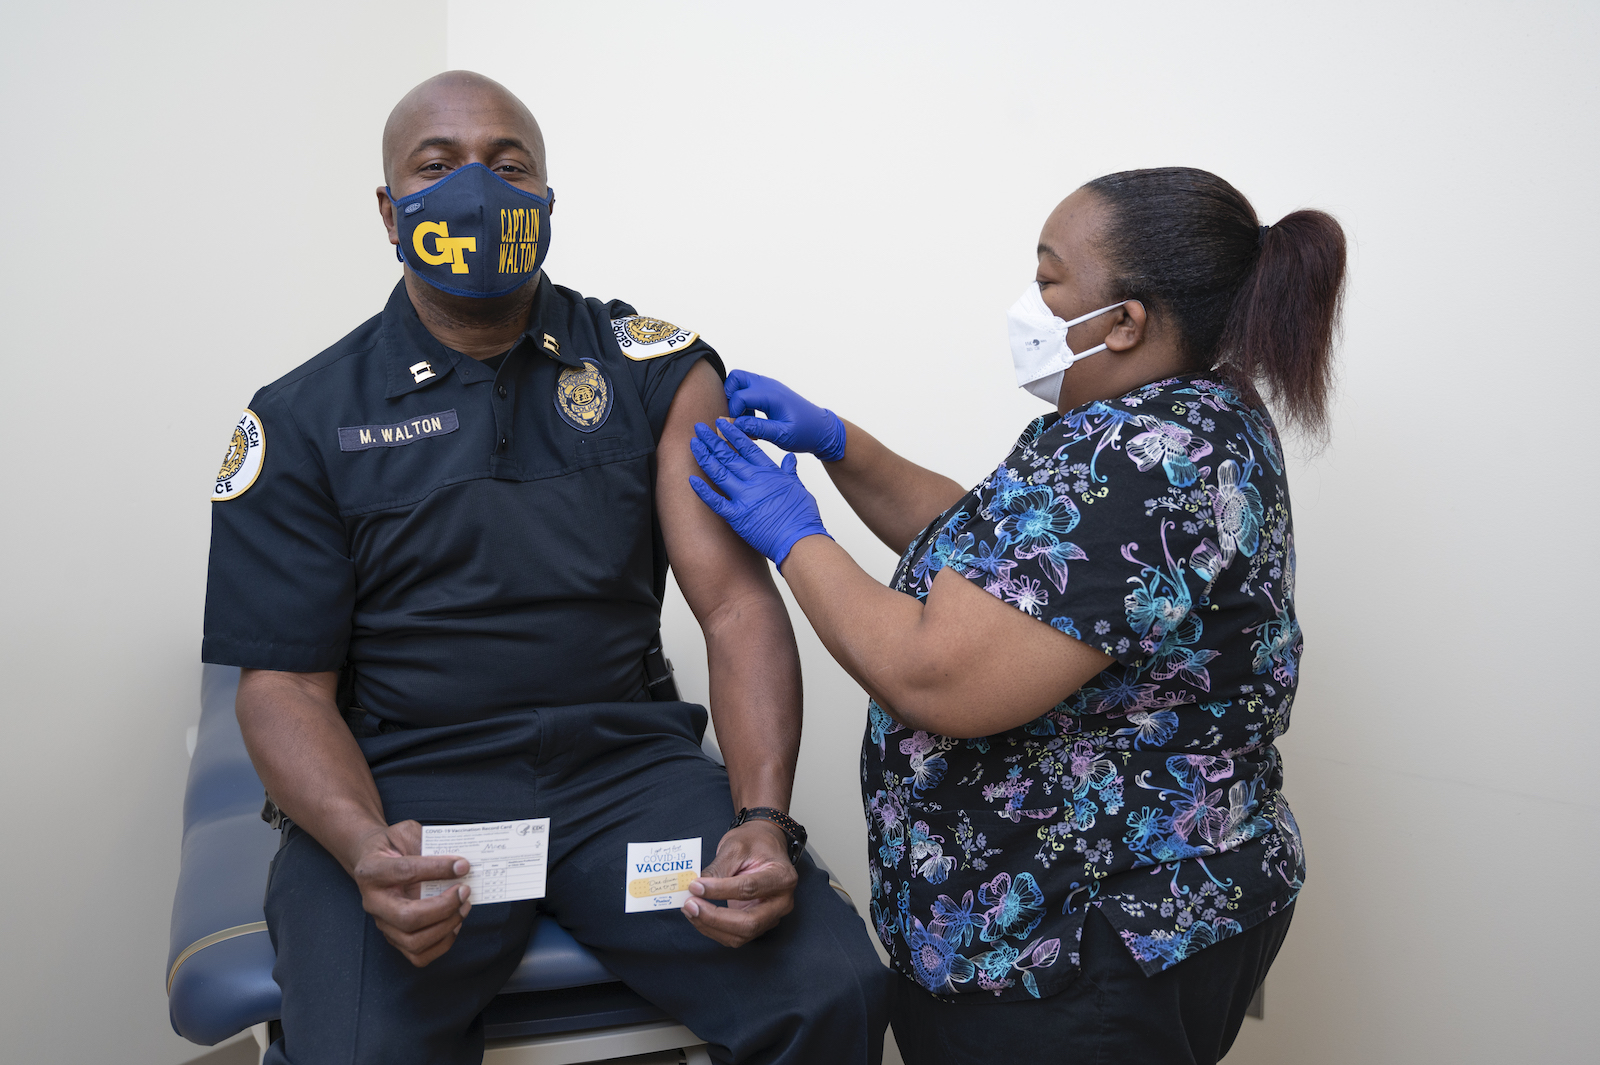 Captain Marcus Walton with GTPD was among the first to get the Covid-19 vaccine at Georgia Tech. Anndrea Terrell, certified medical assistant with Stamps Health Services, gave Walton the vaccine. (Photo by Christopher Moore)